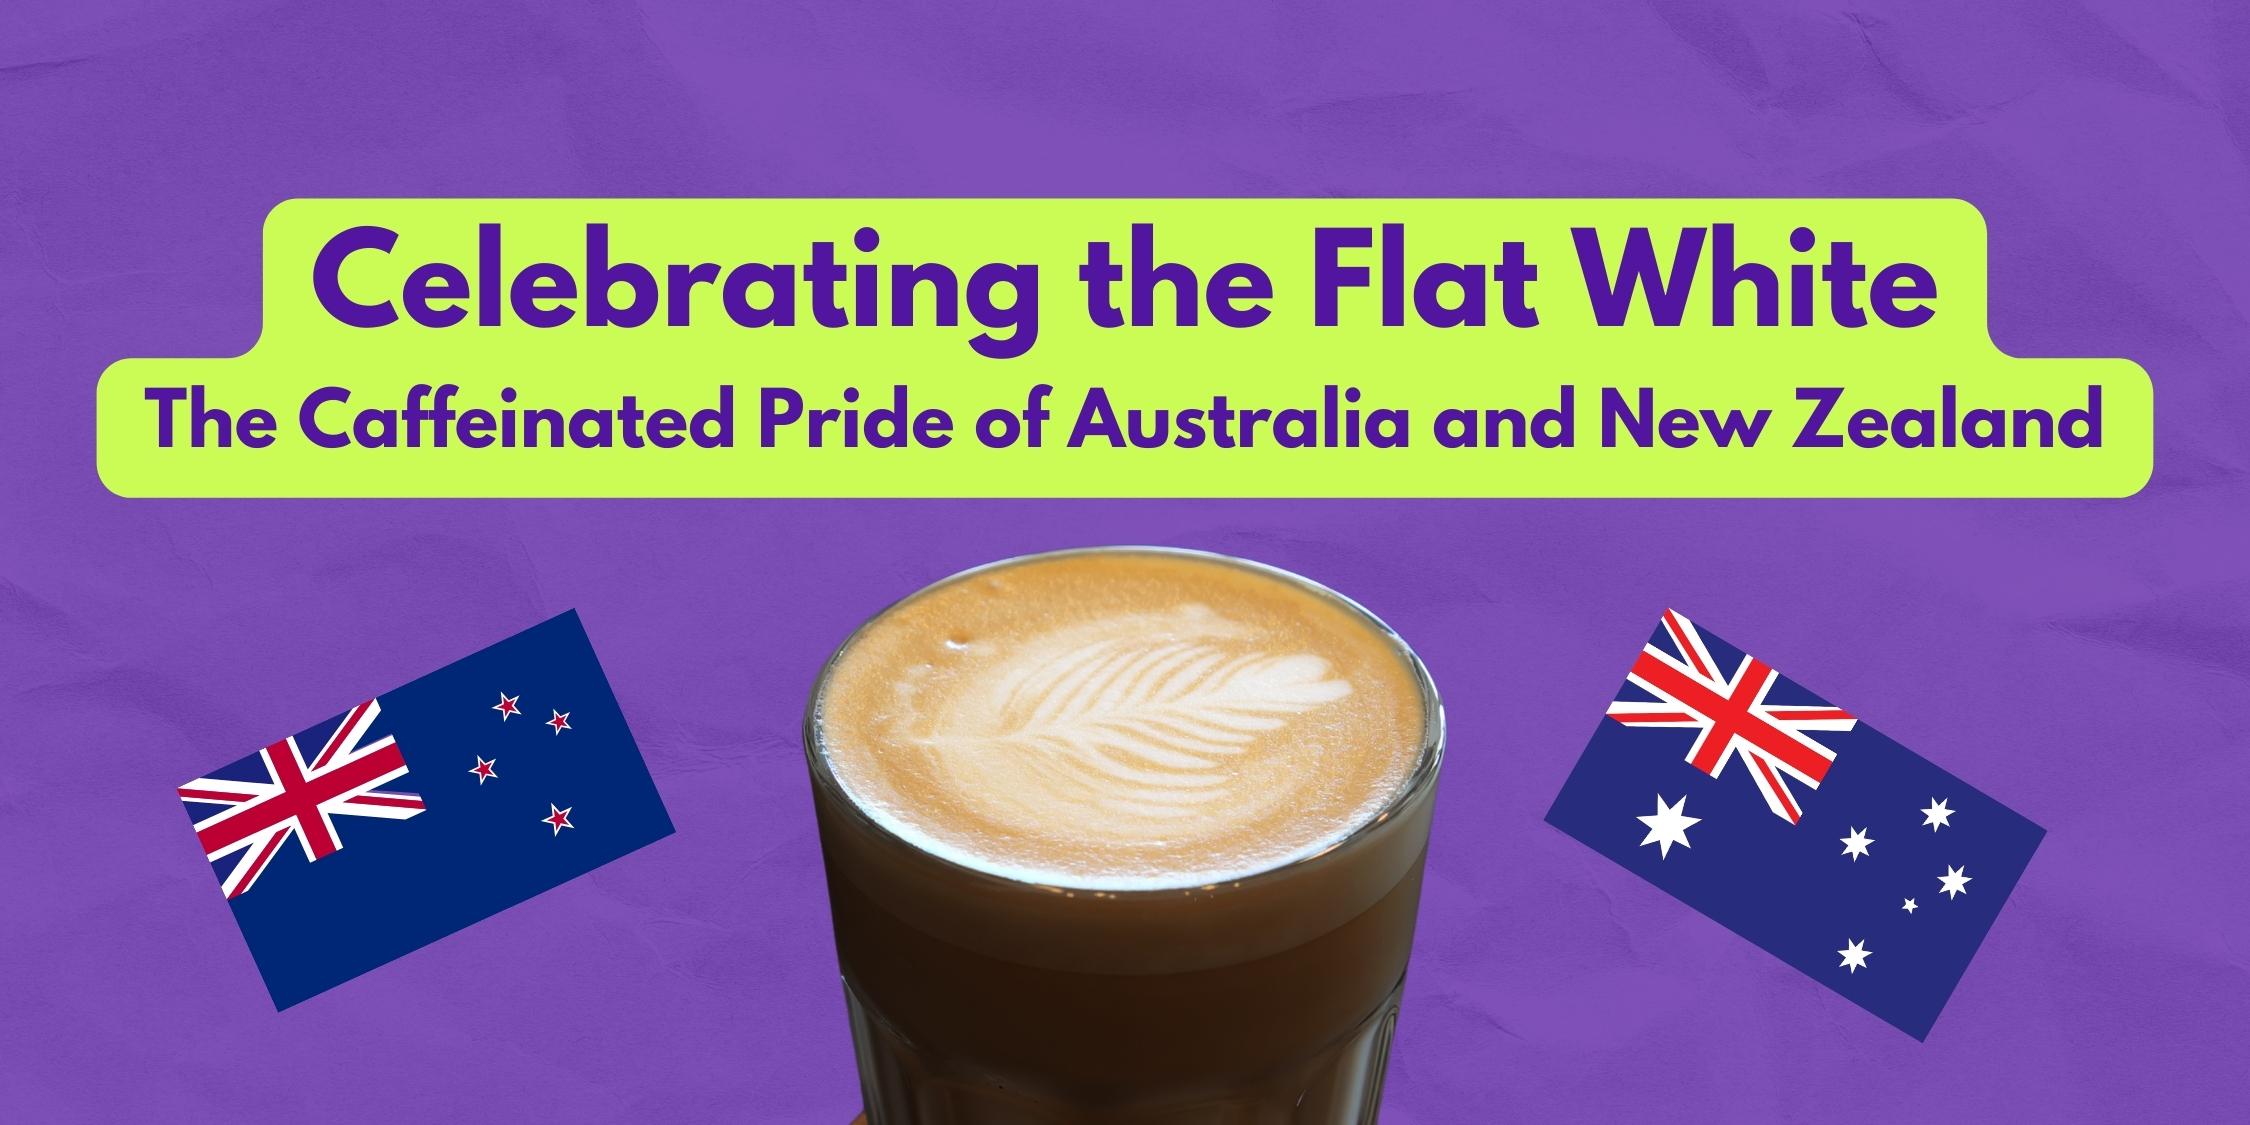 What is a Flat White? The Caffeinated Pride of Australia and New Zealand ☕